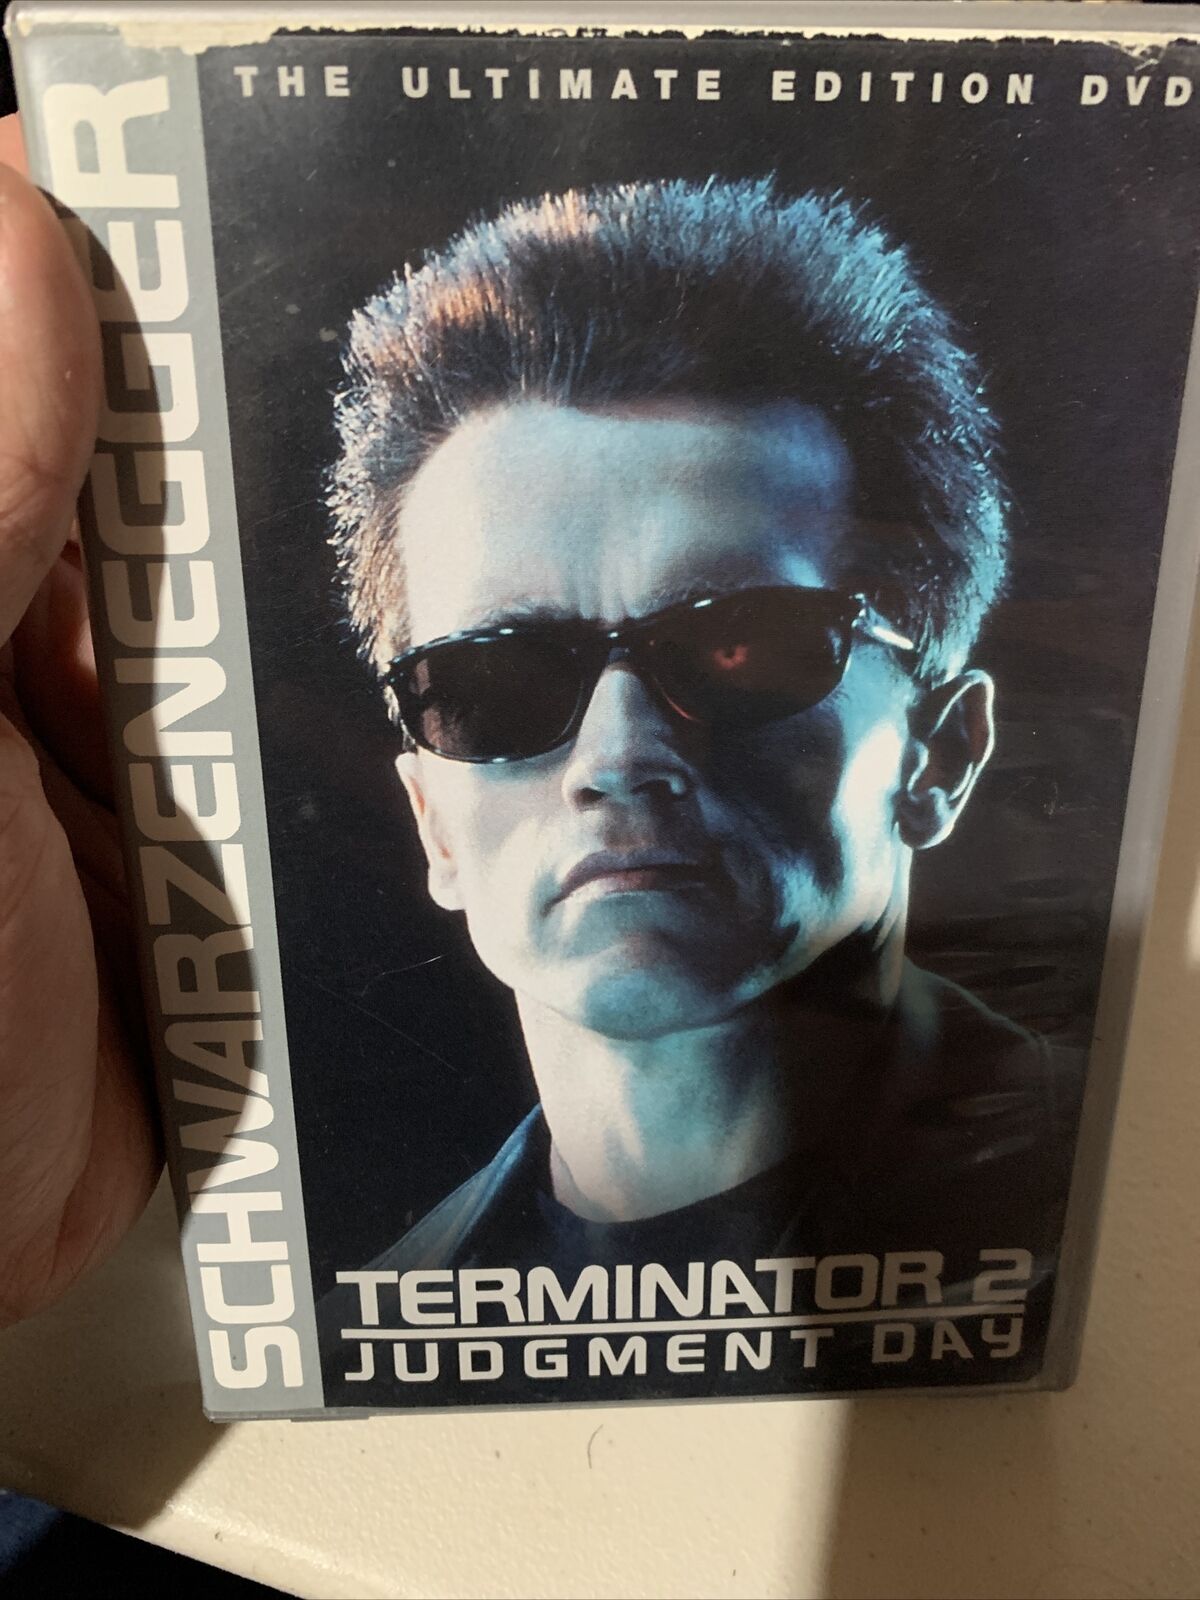 T2 - The Extreme DVD Edition (DVD, 2001, 2-Disc Set)